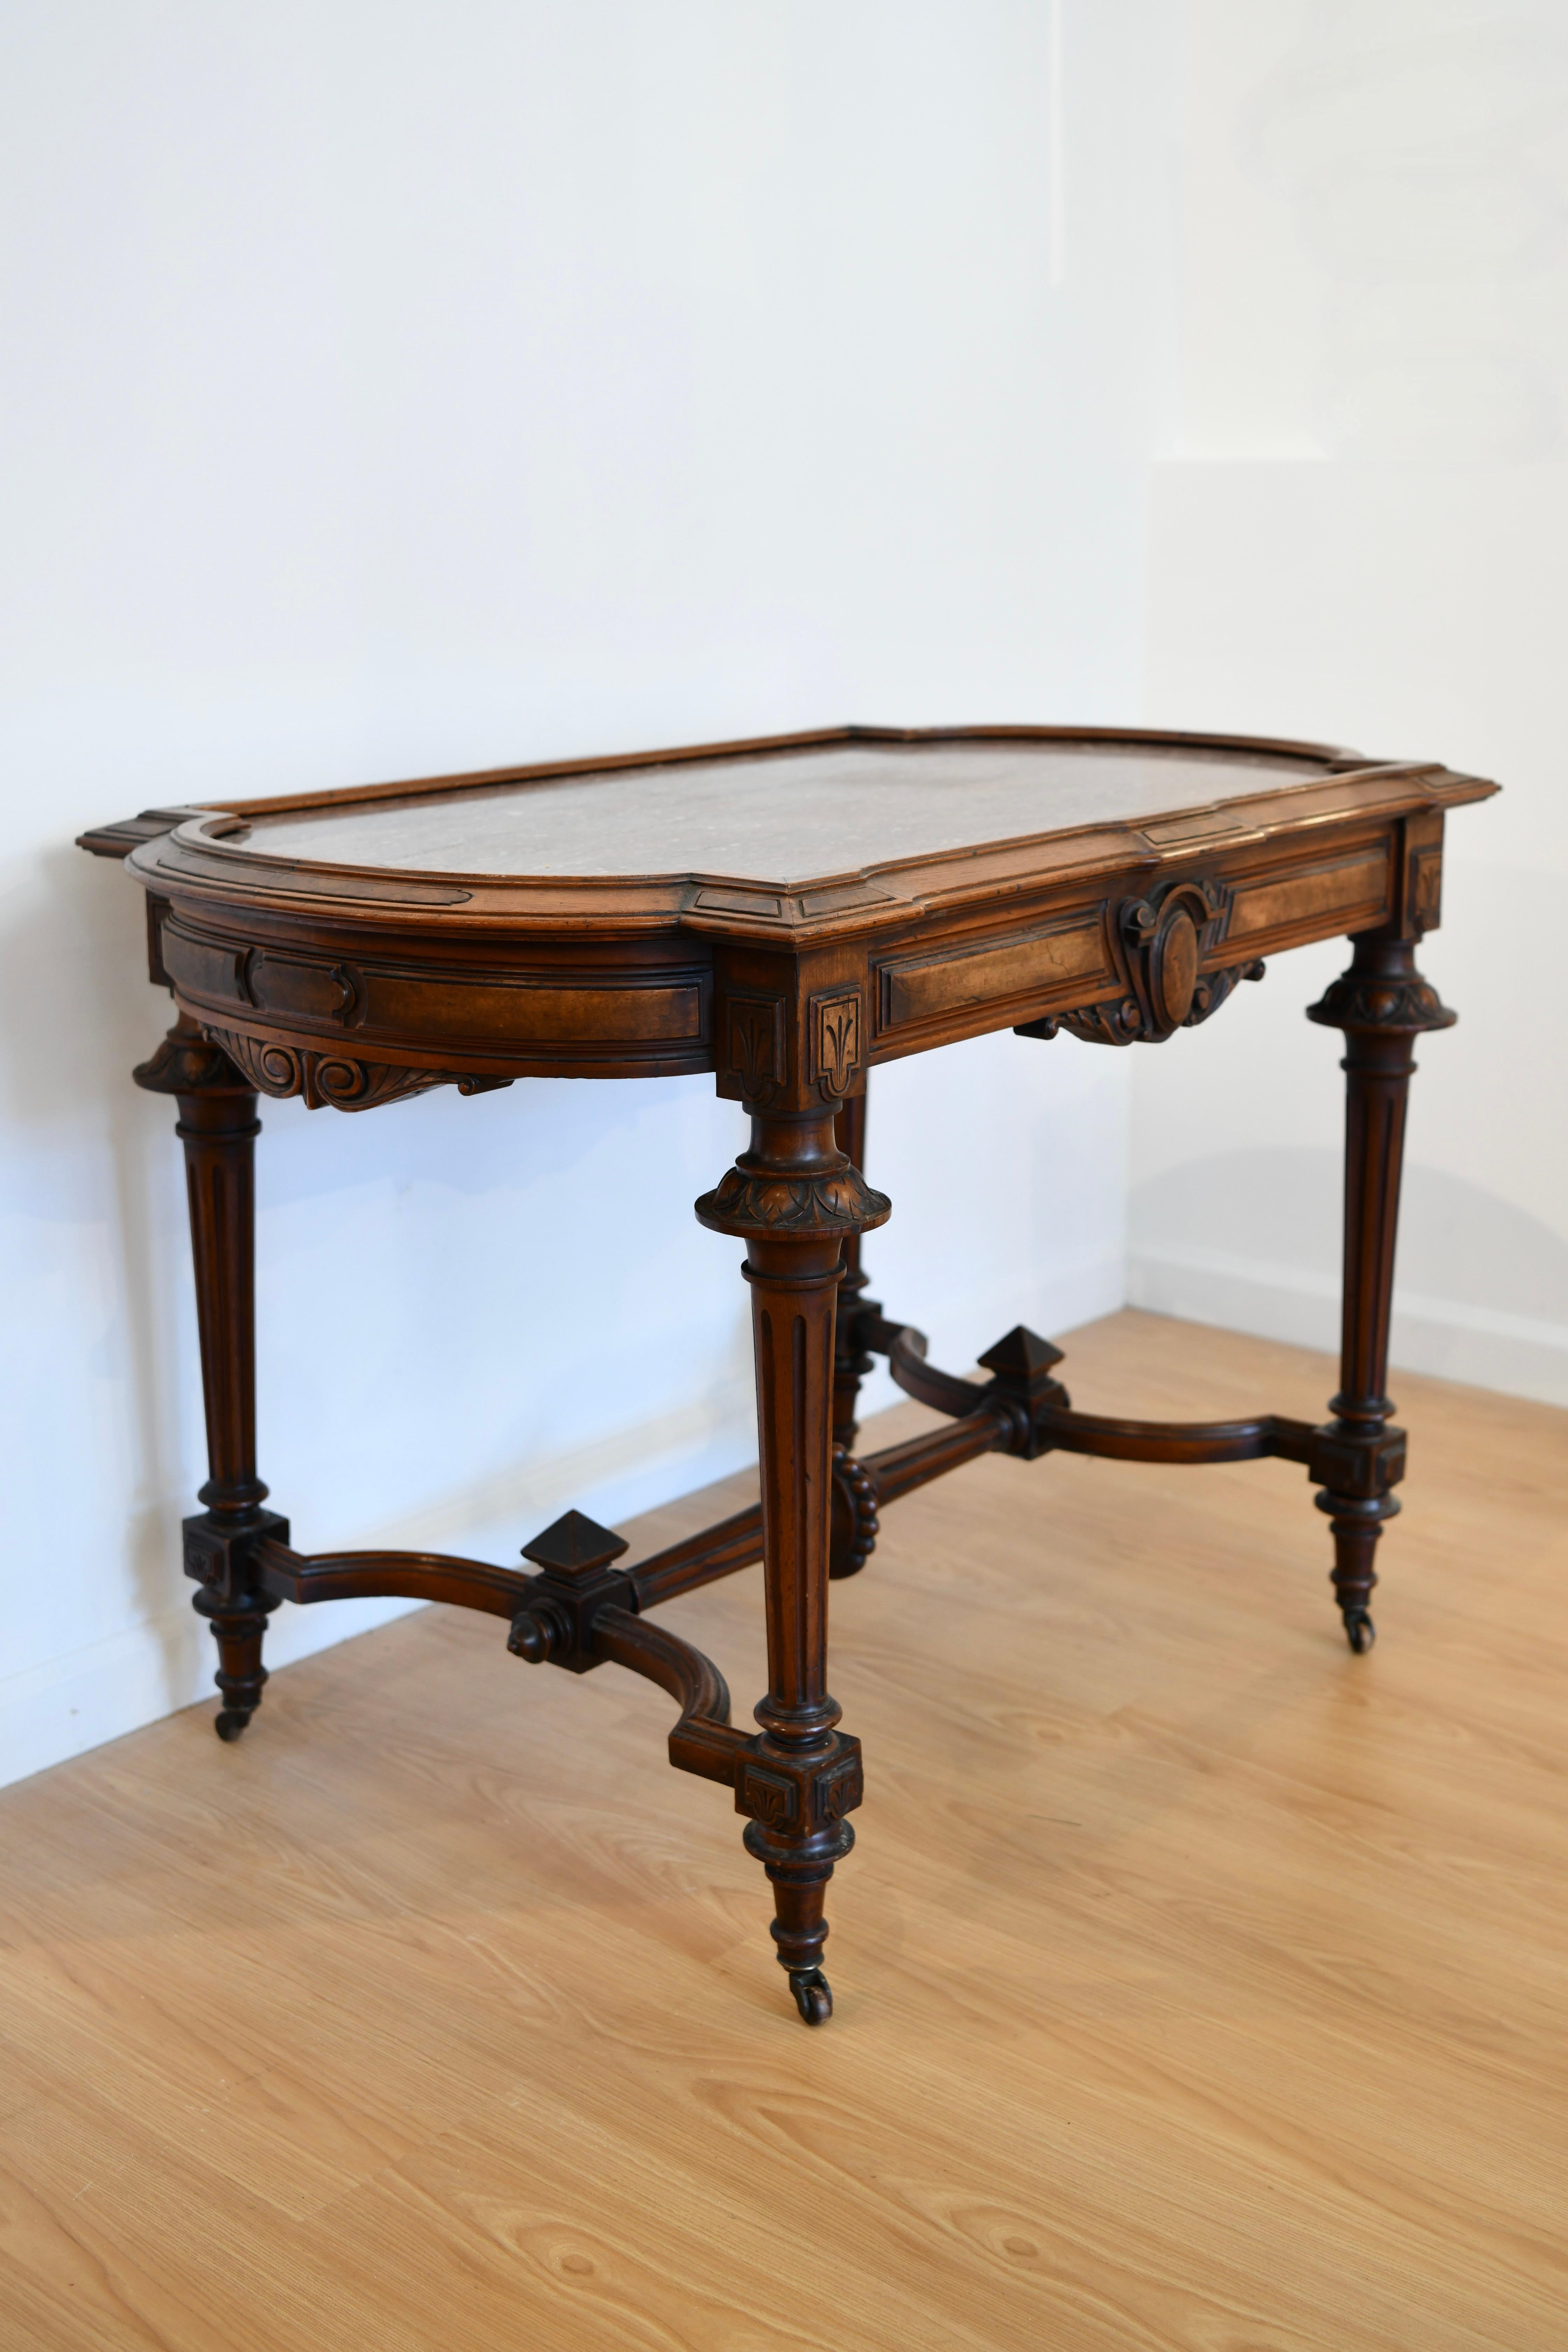 Antique renaissance revival walnut table with carved details, speckled rouge marble top, and on old casters. Dimensions: 21